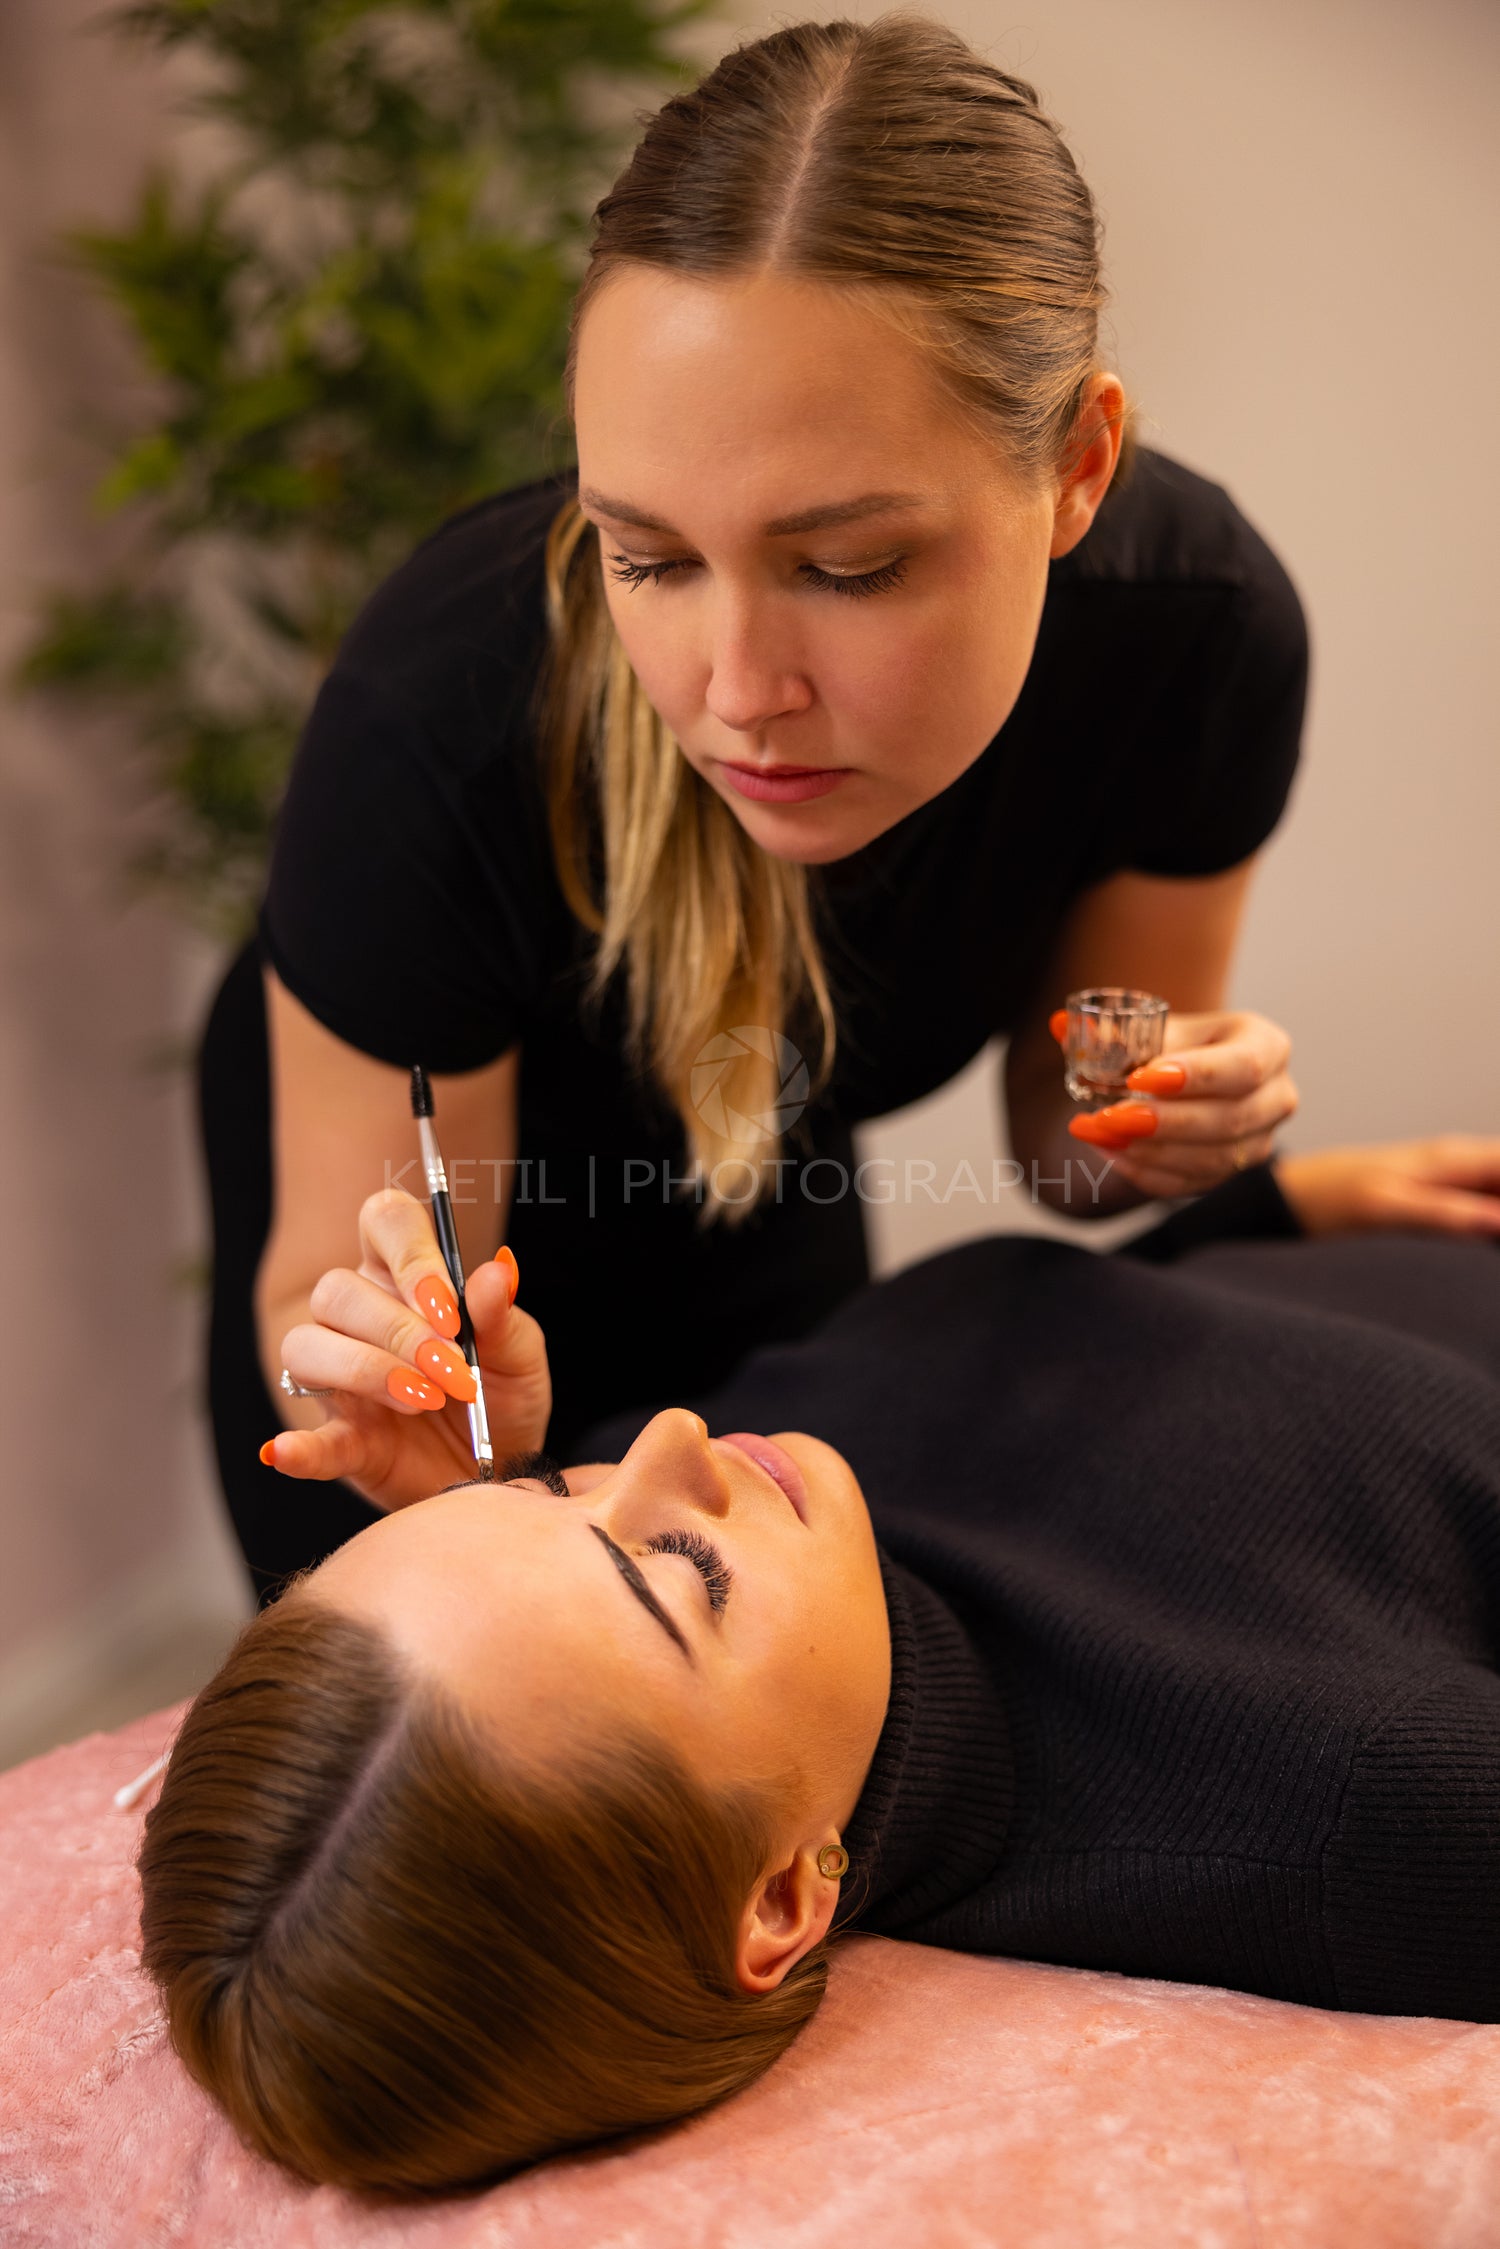 Young Cosmetologist Applying Dye On Female Client's Eyebrow